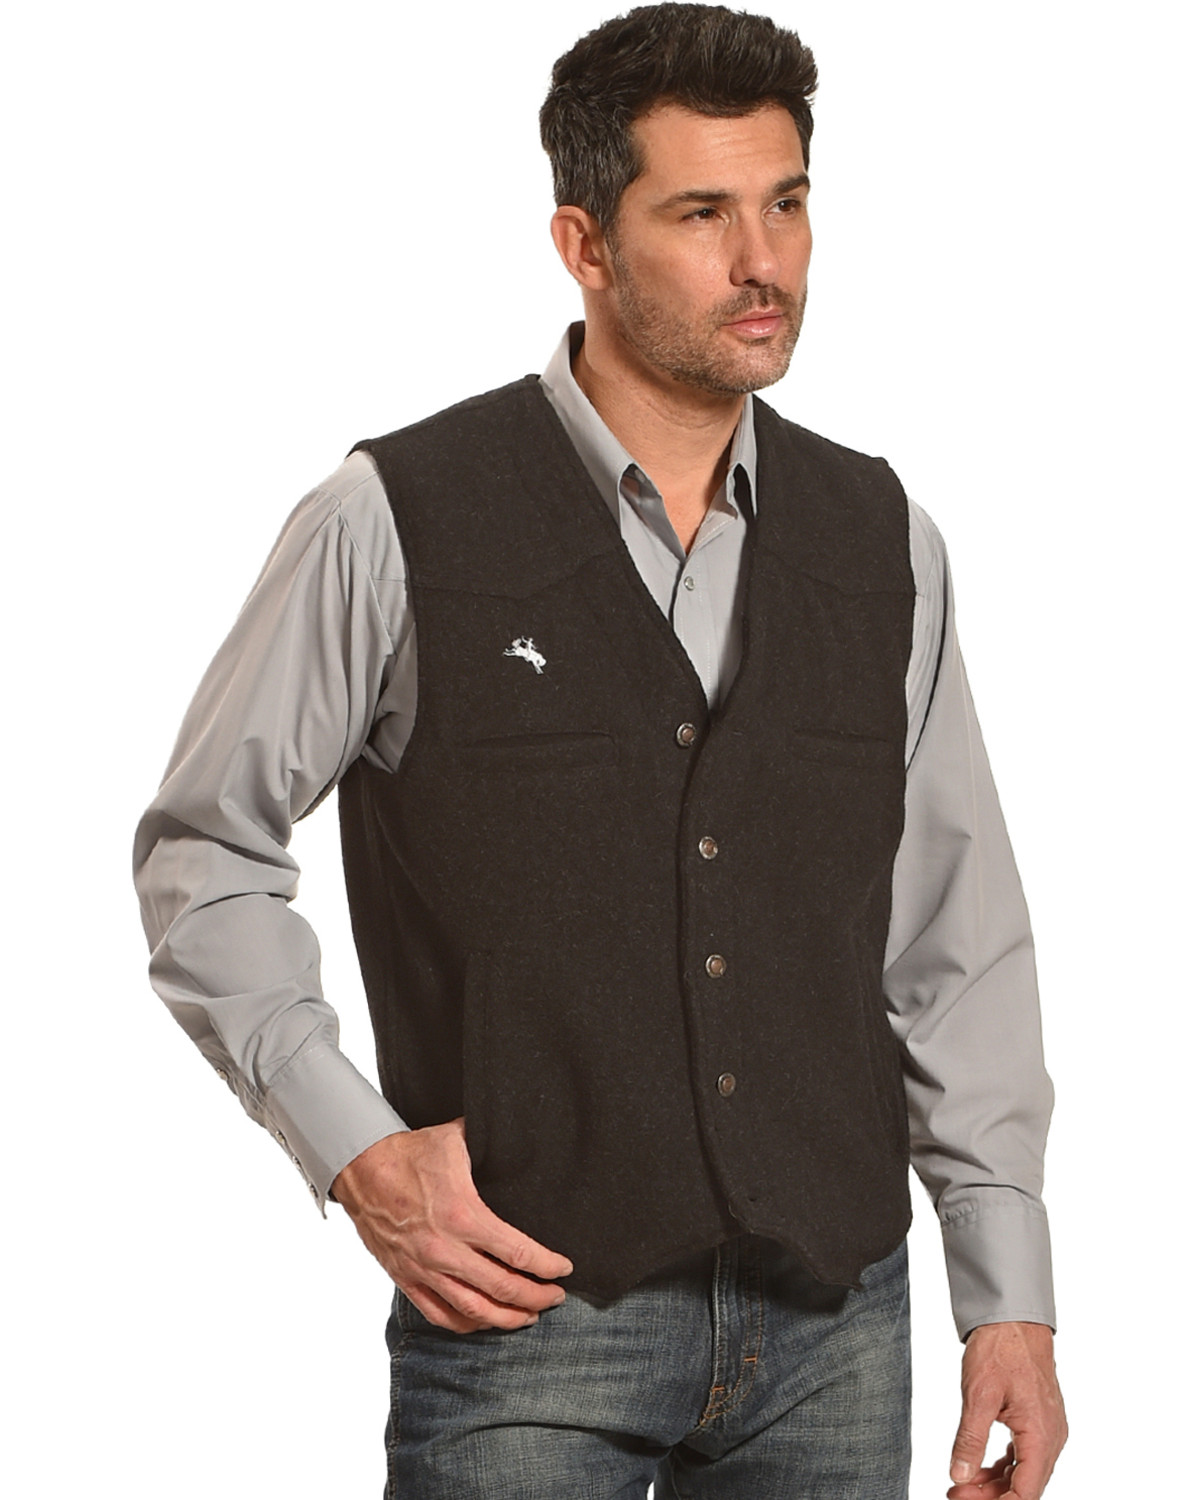 Wyoming Traders Men's Wool Button Closure Vest